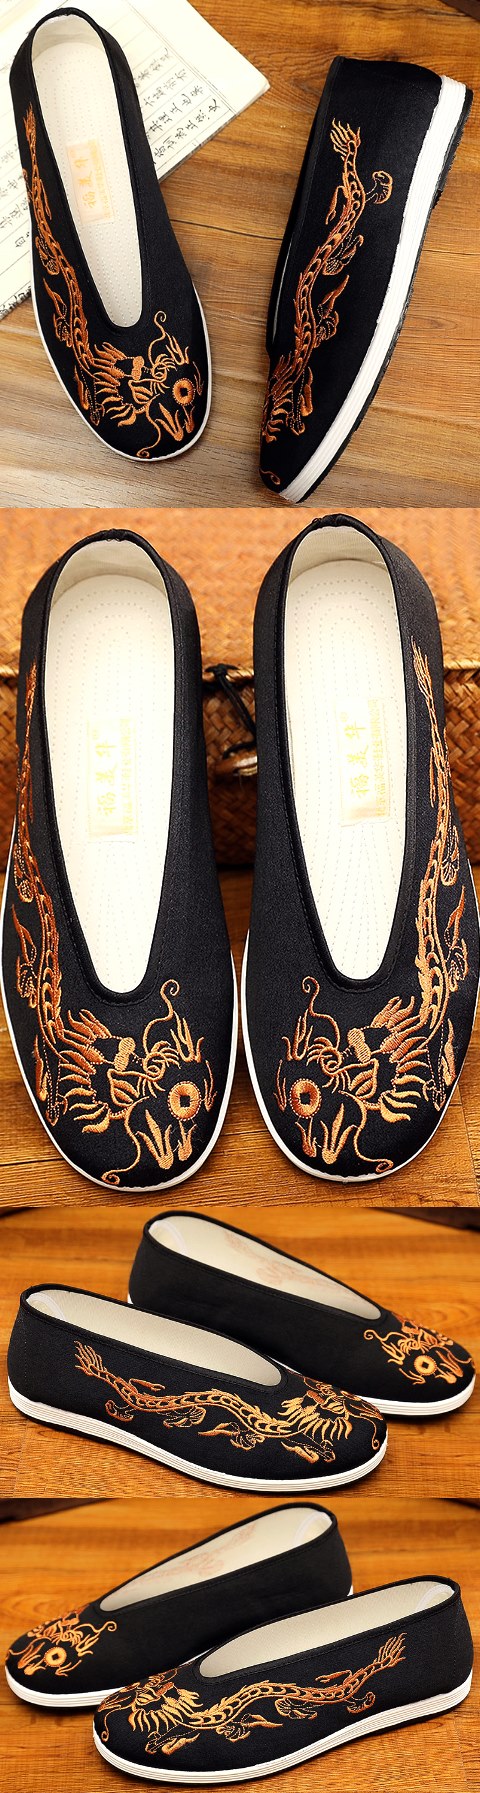 Chinese Round Opening Embroidery Cloth Shoes (RM)